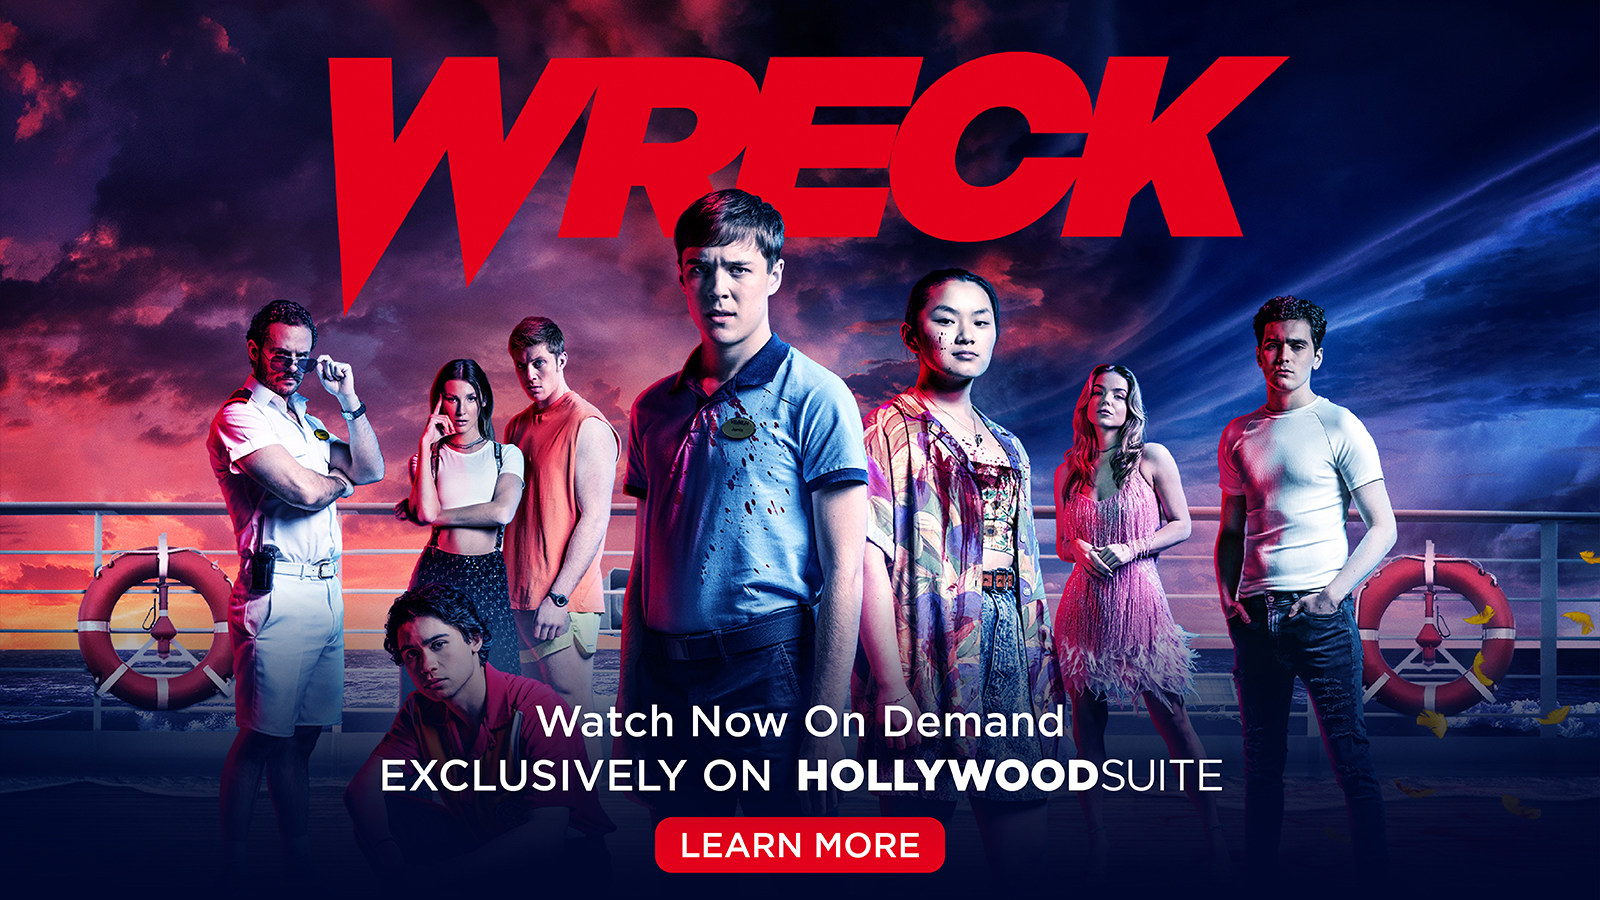 Wreck. Watch now on demand exclusively on Hollywood Suite. Learn More